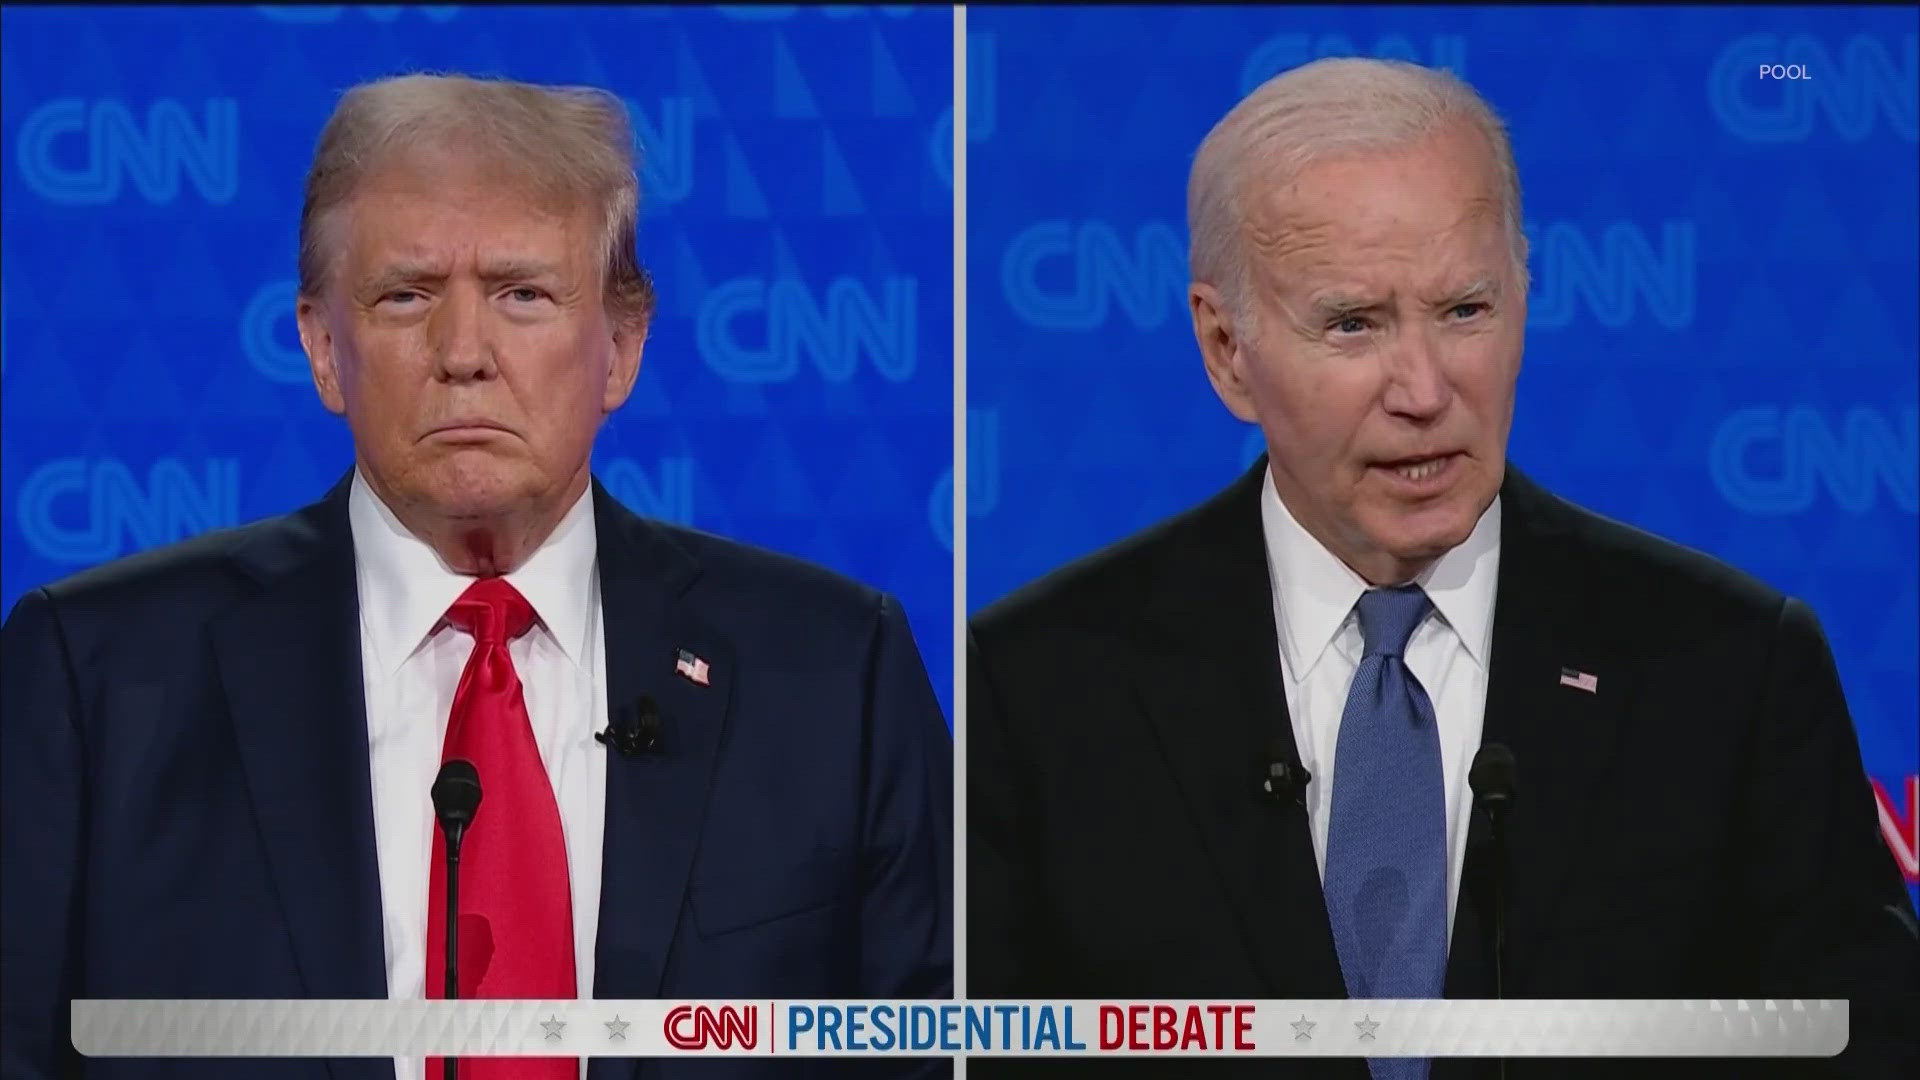 President Joe Biden and former President Donald Trump faced off in Atlanta for the first-ever presidential debate ahead of the 2024 November election.